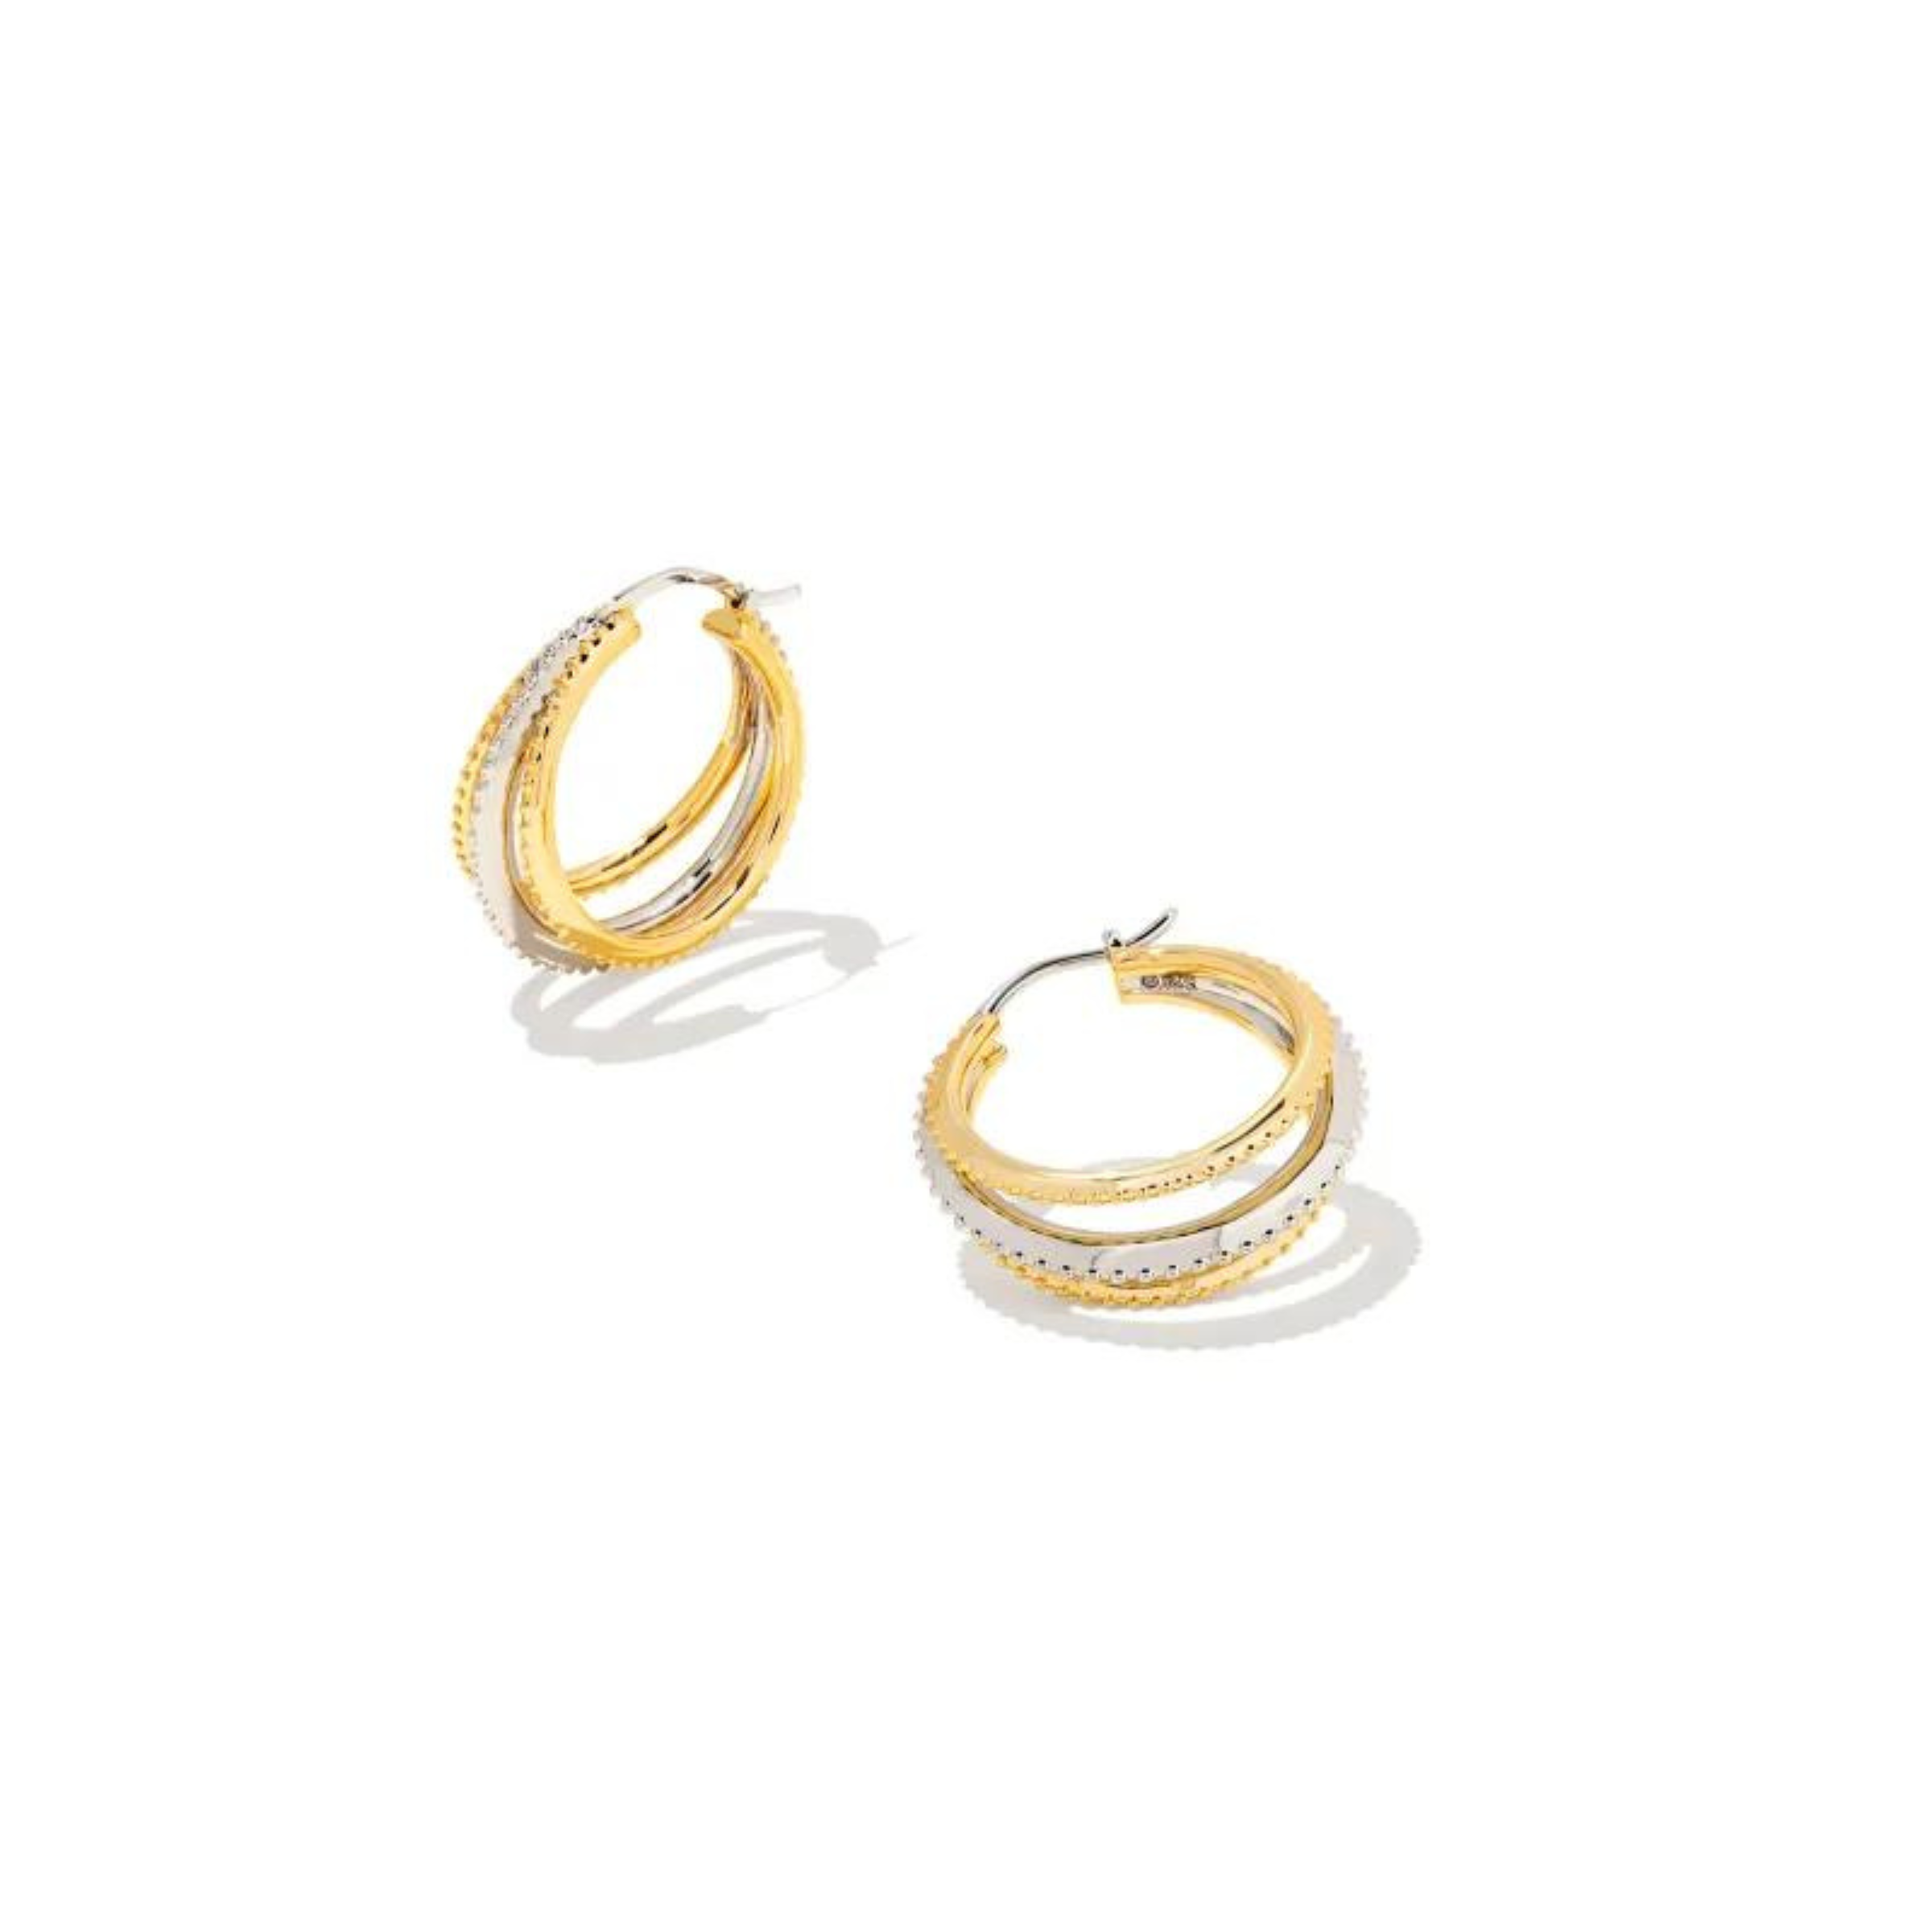 Triple layered hoop earrings. The two outer hoops are gold and the center hoop is silver. These earrings are pictured on a white background. 